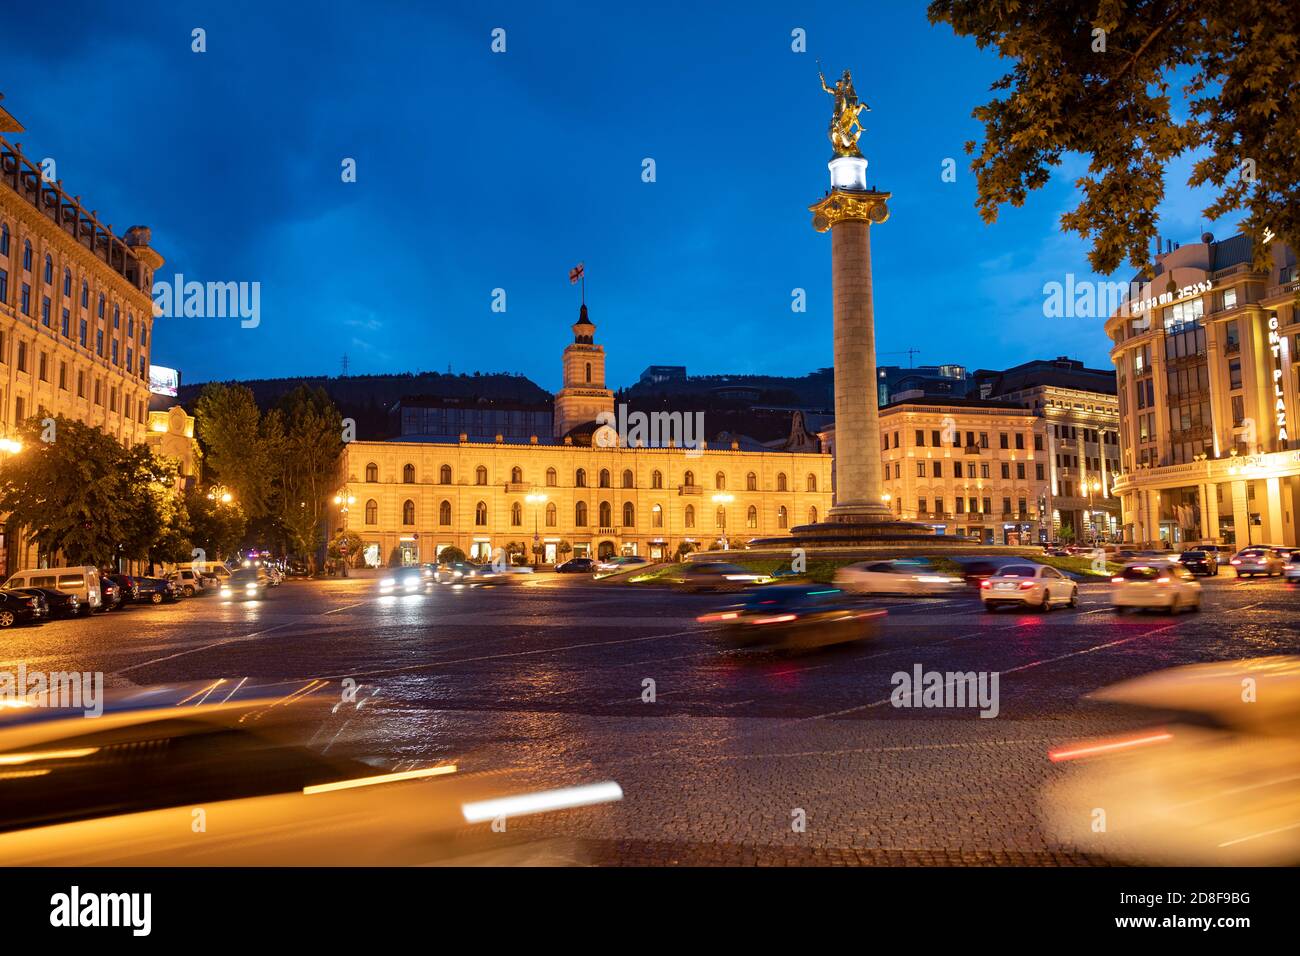 Nighttime scene of traffic encircling the St. George statue at Liberty Square (Freedom Square) in Tbilisi, Georgia, Caucasus, Eastern Europe. Stock Photo